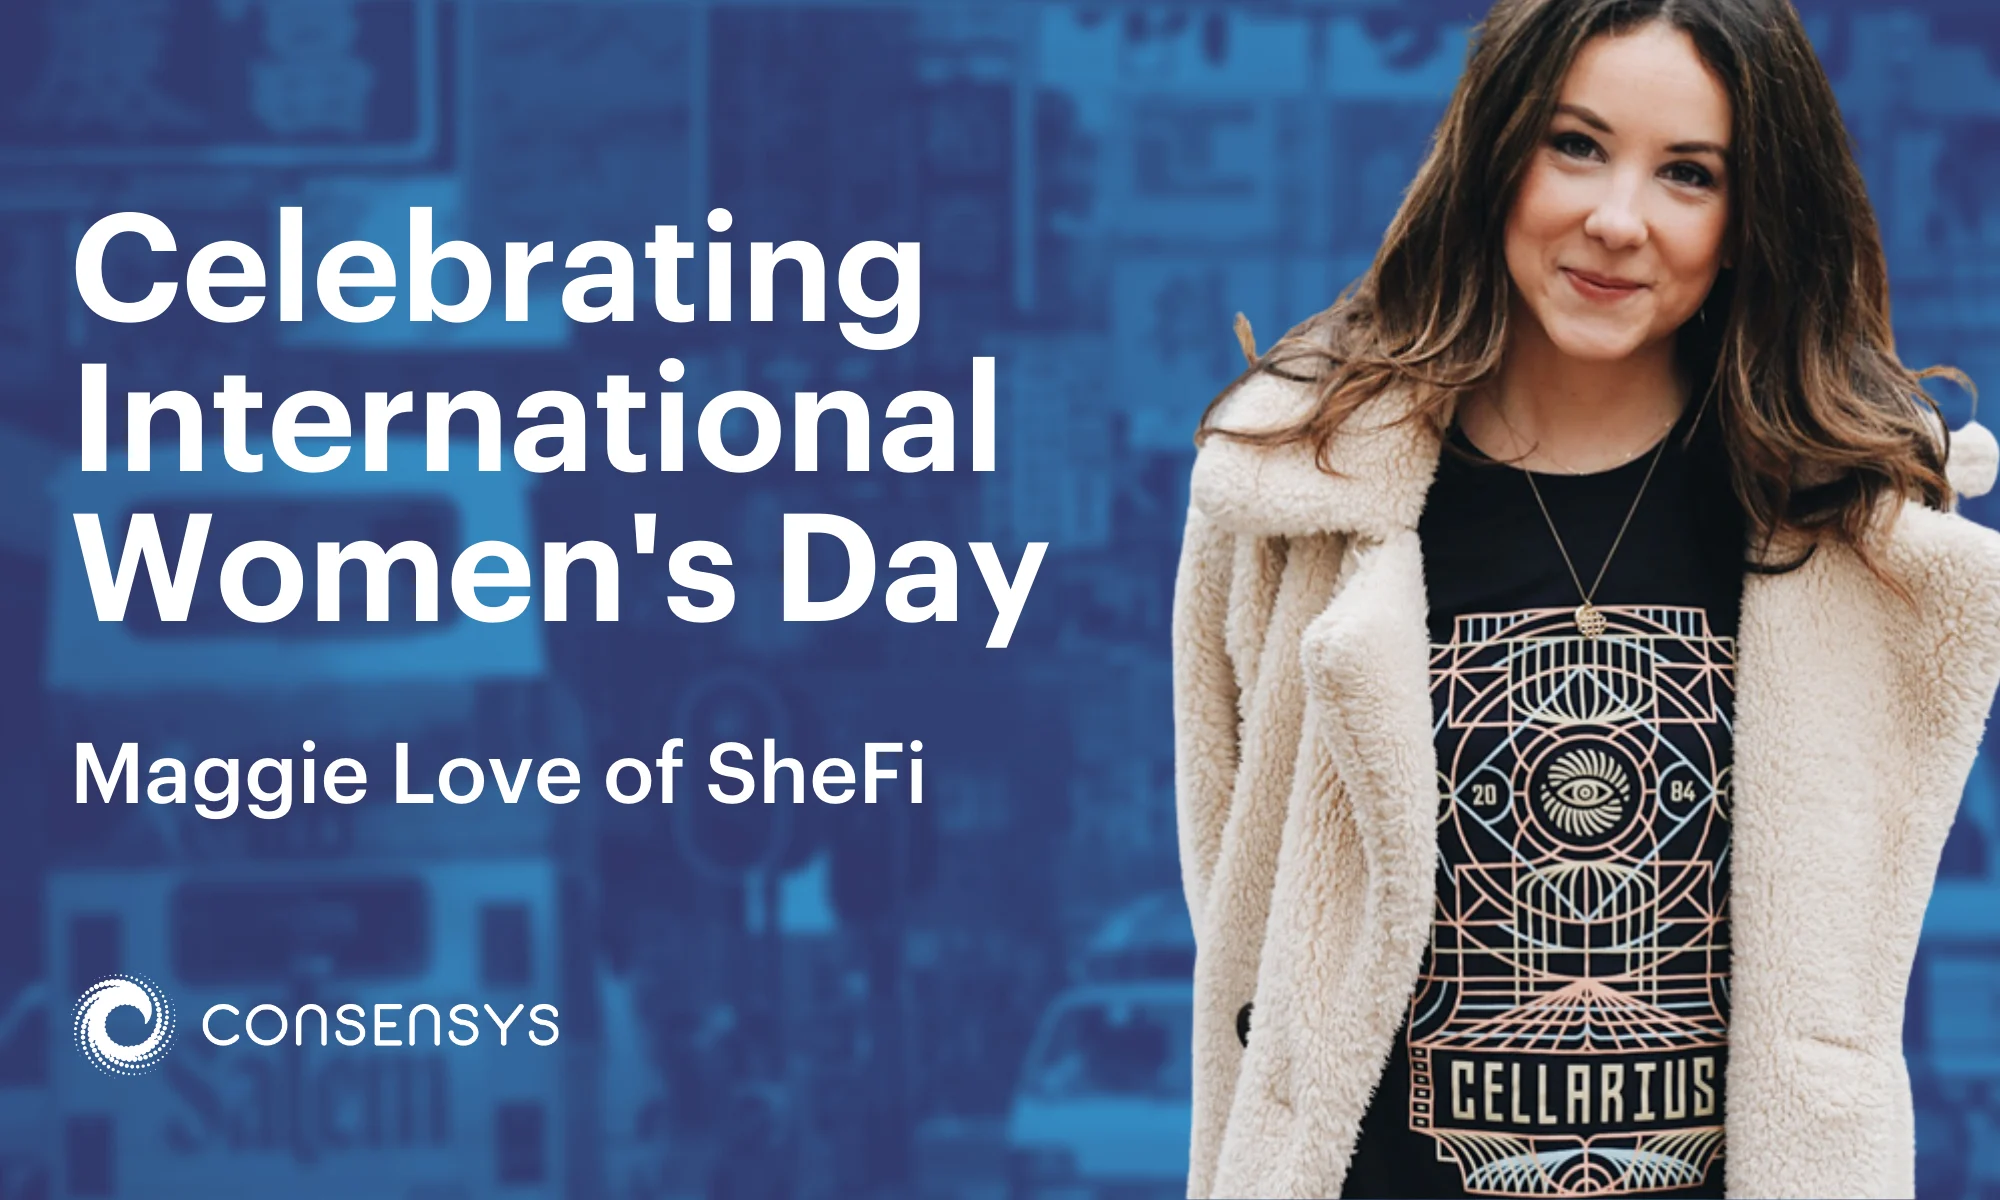 Image: Women of DeFi: How Maggie Love Makes DeFi More Relatable with SheFi